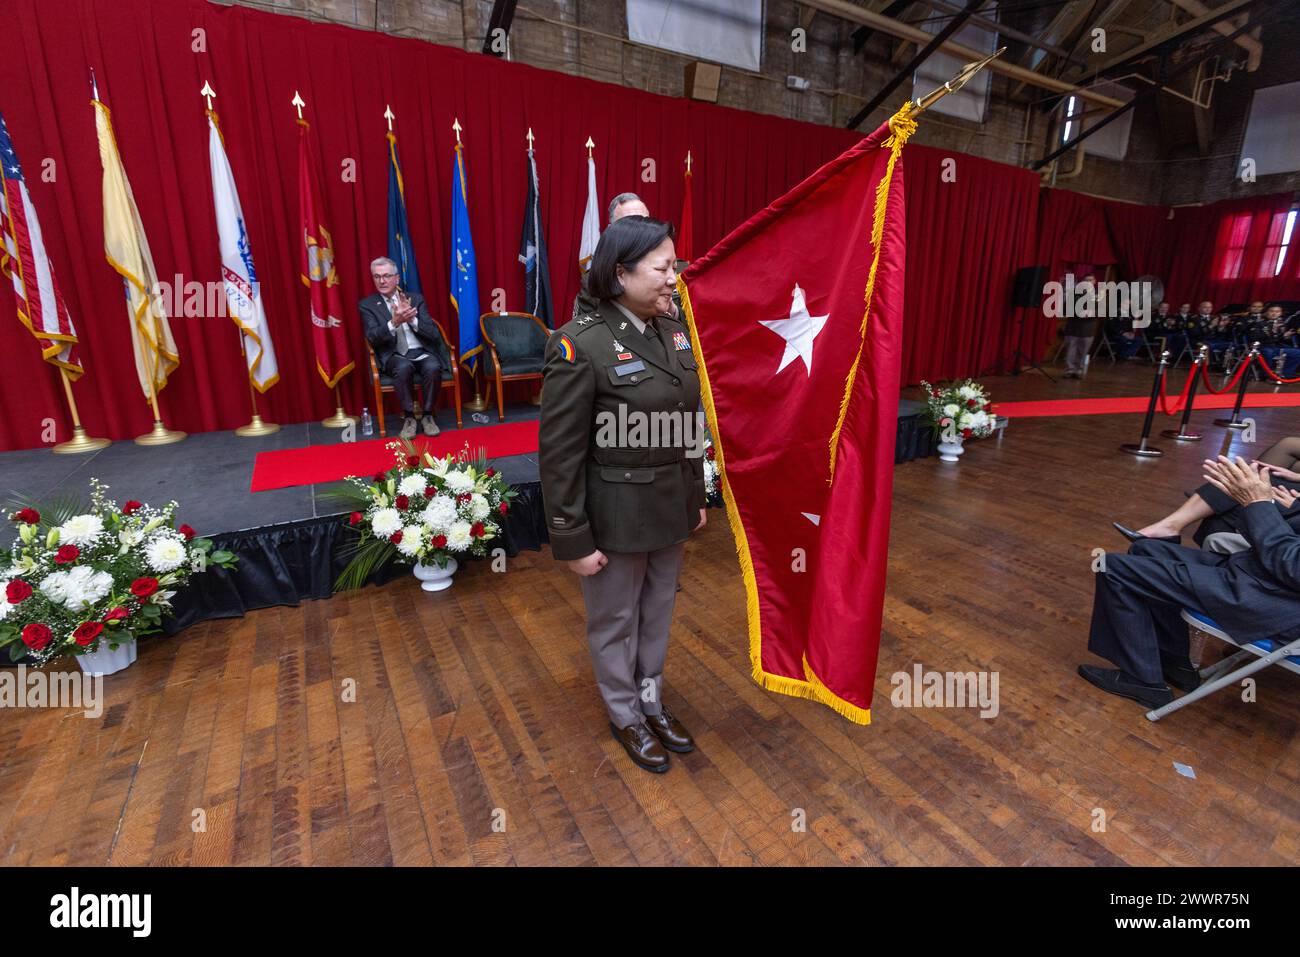 Maj. Gen. Lisa J. Hou, D.O., The Adjutant General of New Jersey, stands next to her two-star general’s flag during her promotion ceremony at National Guard Armory in Lawrenceville, New Jersey, Feb. 3, 2024. Hou, the 33rd Adjutant General of New Jersey, commands more than 8,400 Soldiers and Airmen of the New Jersey National Guard. As Commissioner of the New Jersey Department of Military and Veterans Affairs, Hou leads, directs, and manages the New Jersey Department of Military and Veterans Affairs in the execution of federal and state missions. In addition, she manages all state veterans’ progr Stock Photo